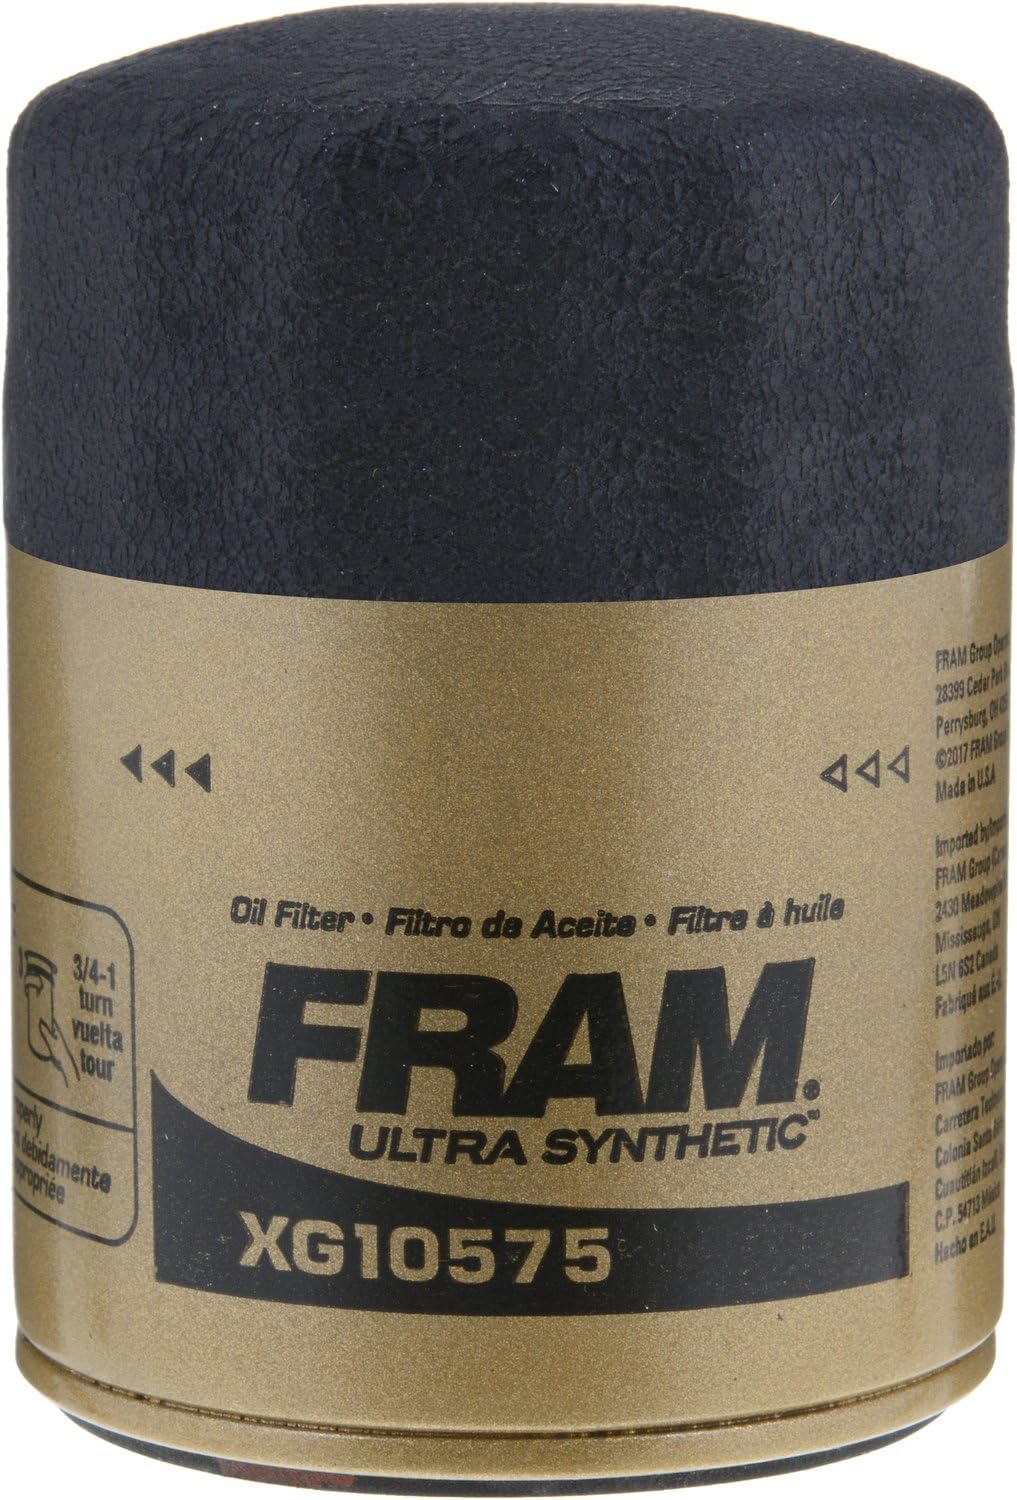 Fram Ultra Synthetic Oil Filter, isolated on a white background.